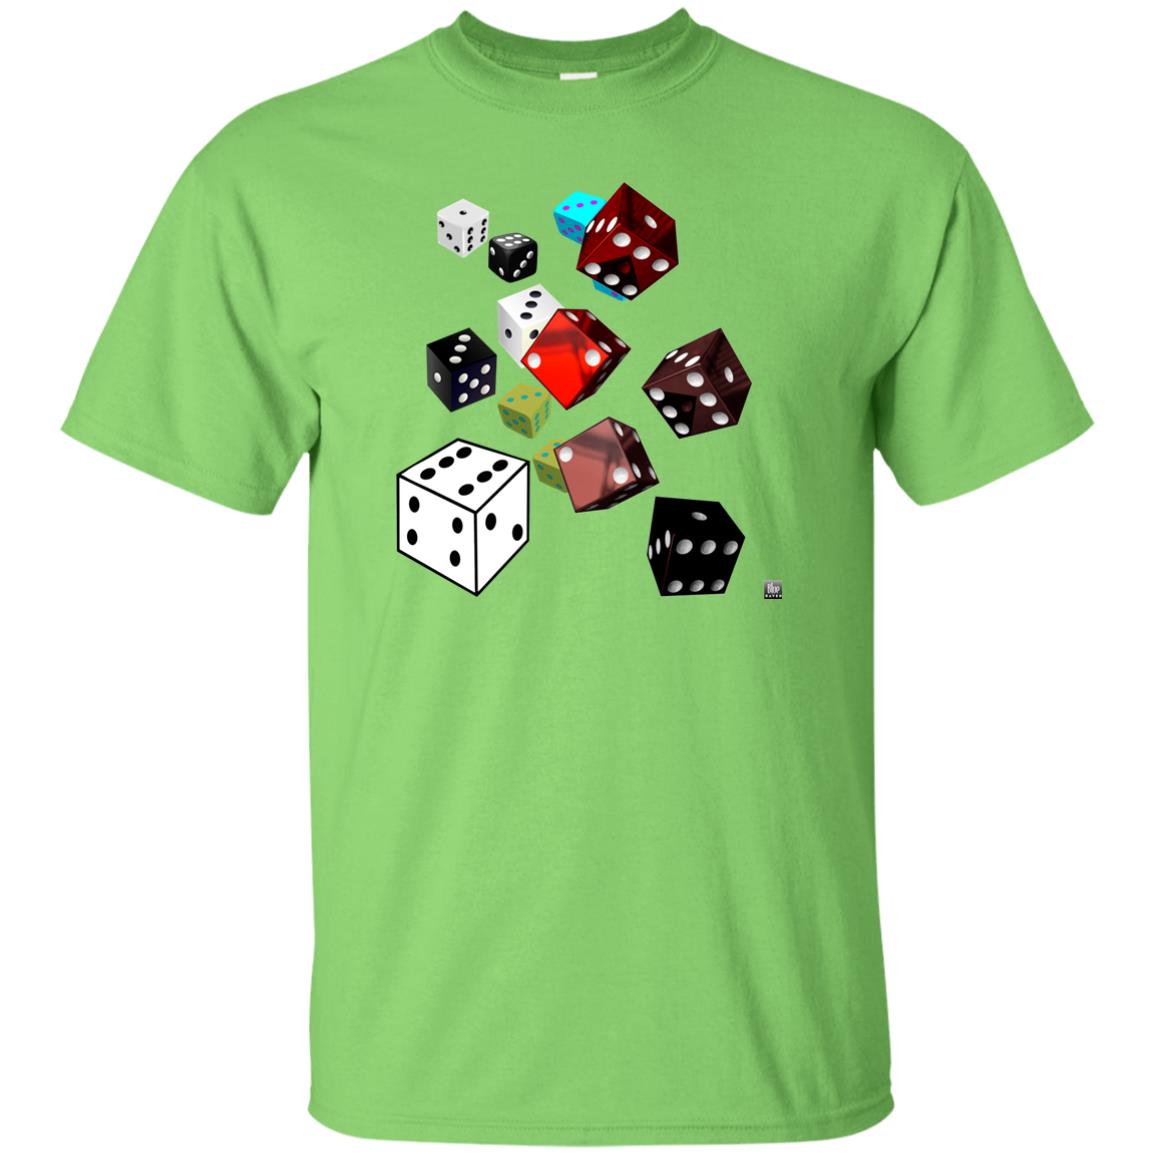 roll of the dice - Men's Classic Fit T-Shirt